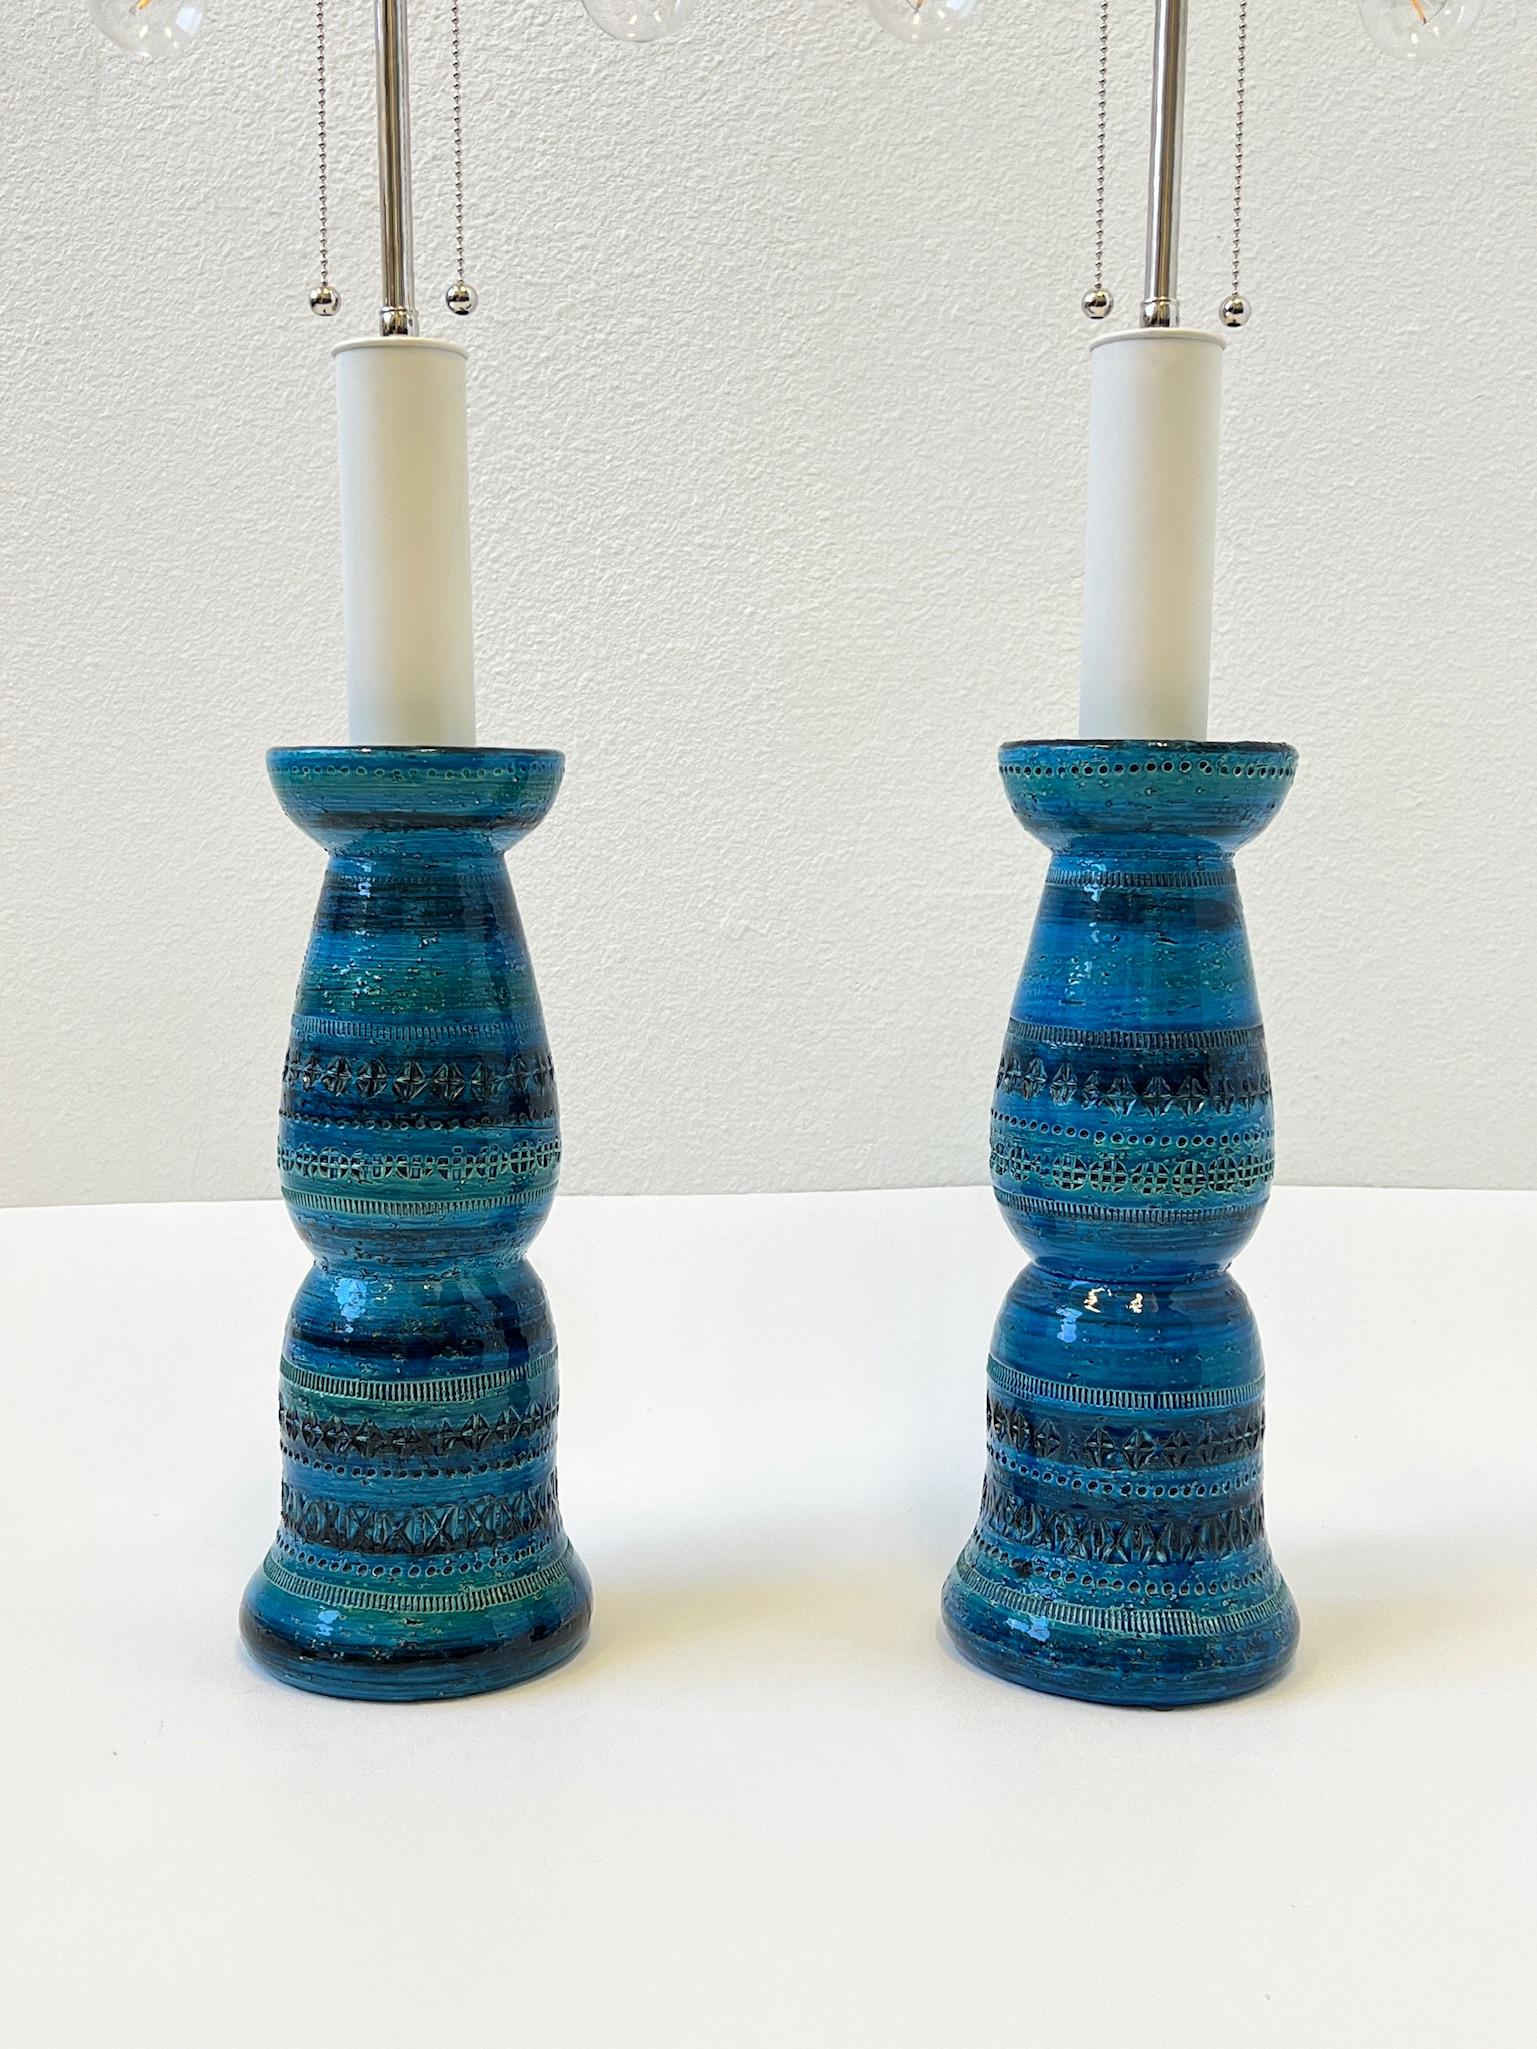 Pair of Italian Ceramic and Nickel Table Lamps by Aldo Londi for Bitossi 1